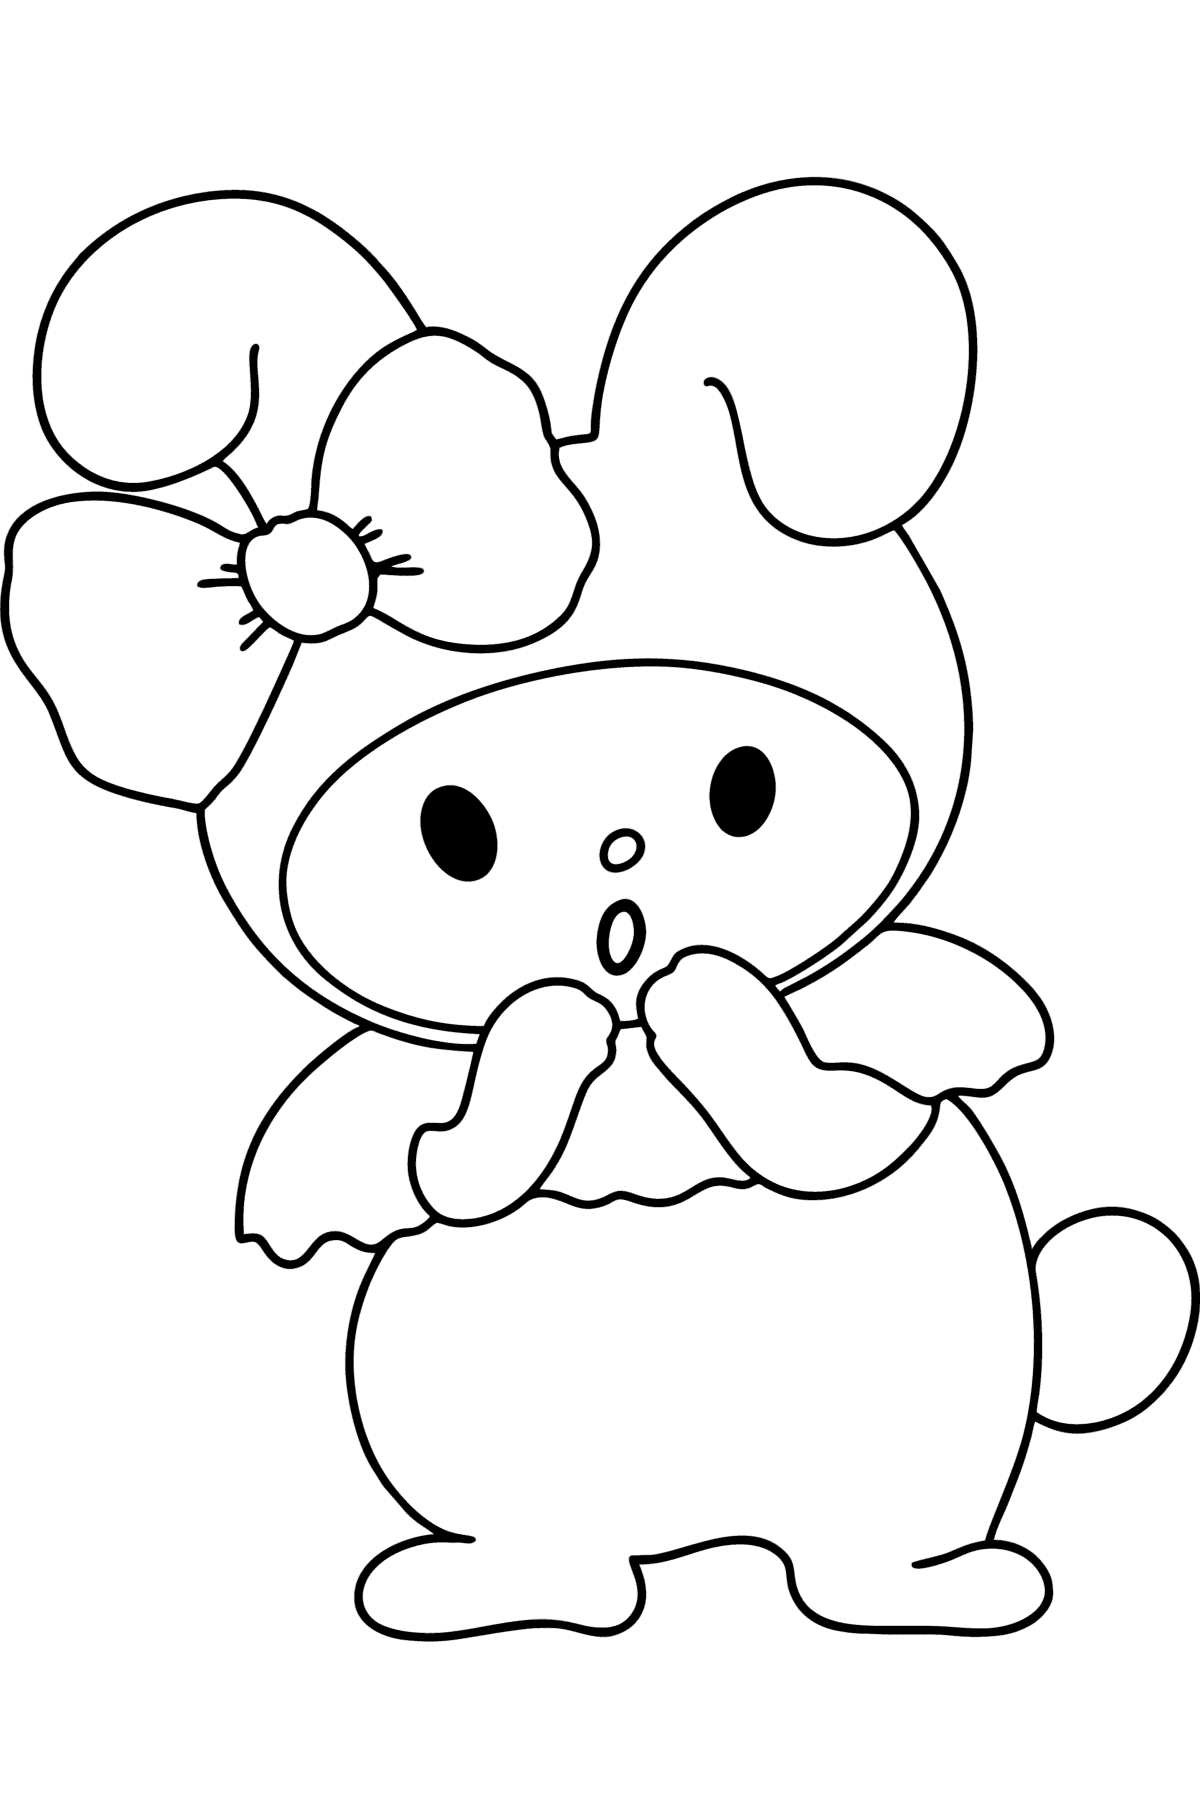 Hello Kitty My Melody coloring page ? Online and Print for Free